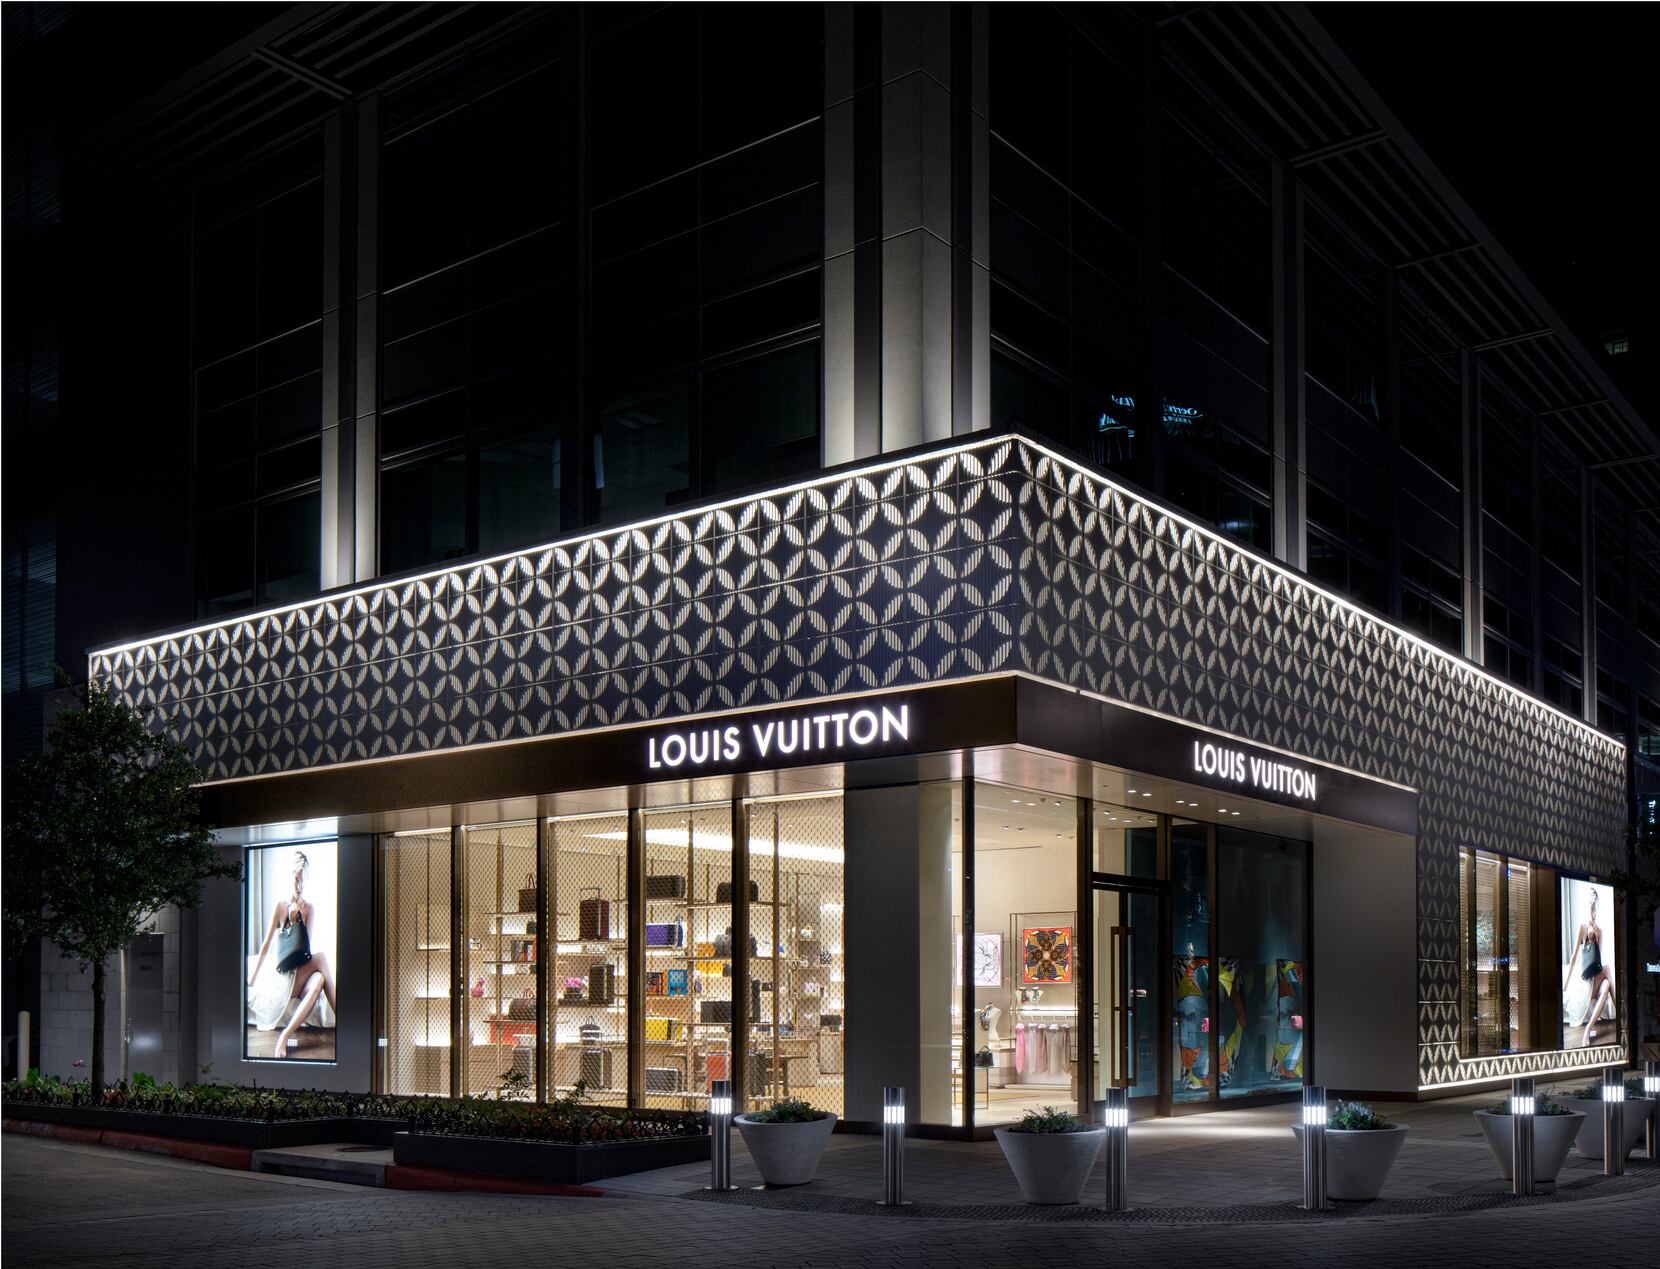 You'll Be Seeing Lots of Spots at Louis Vuitton's Soho Pop-Up